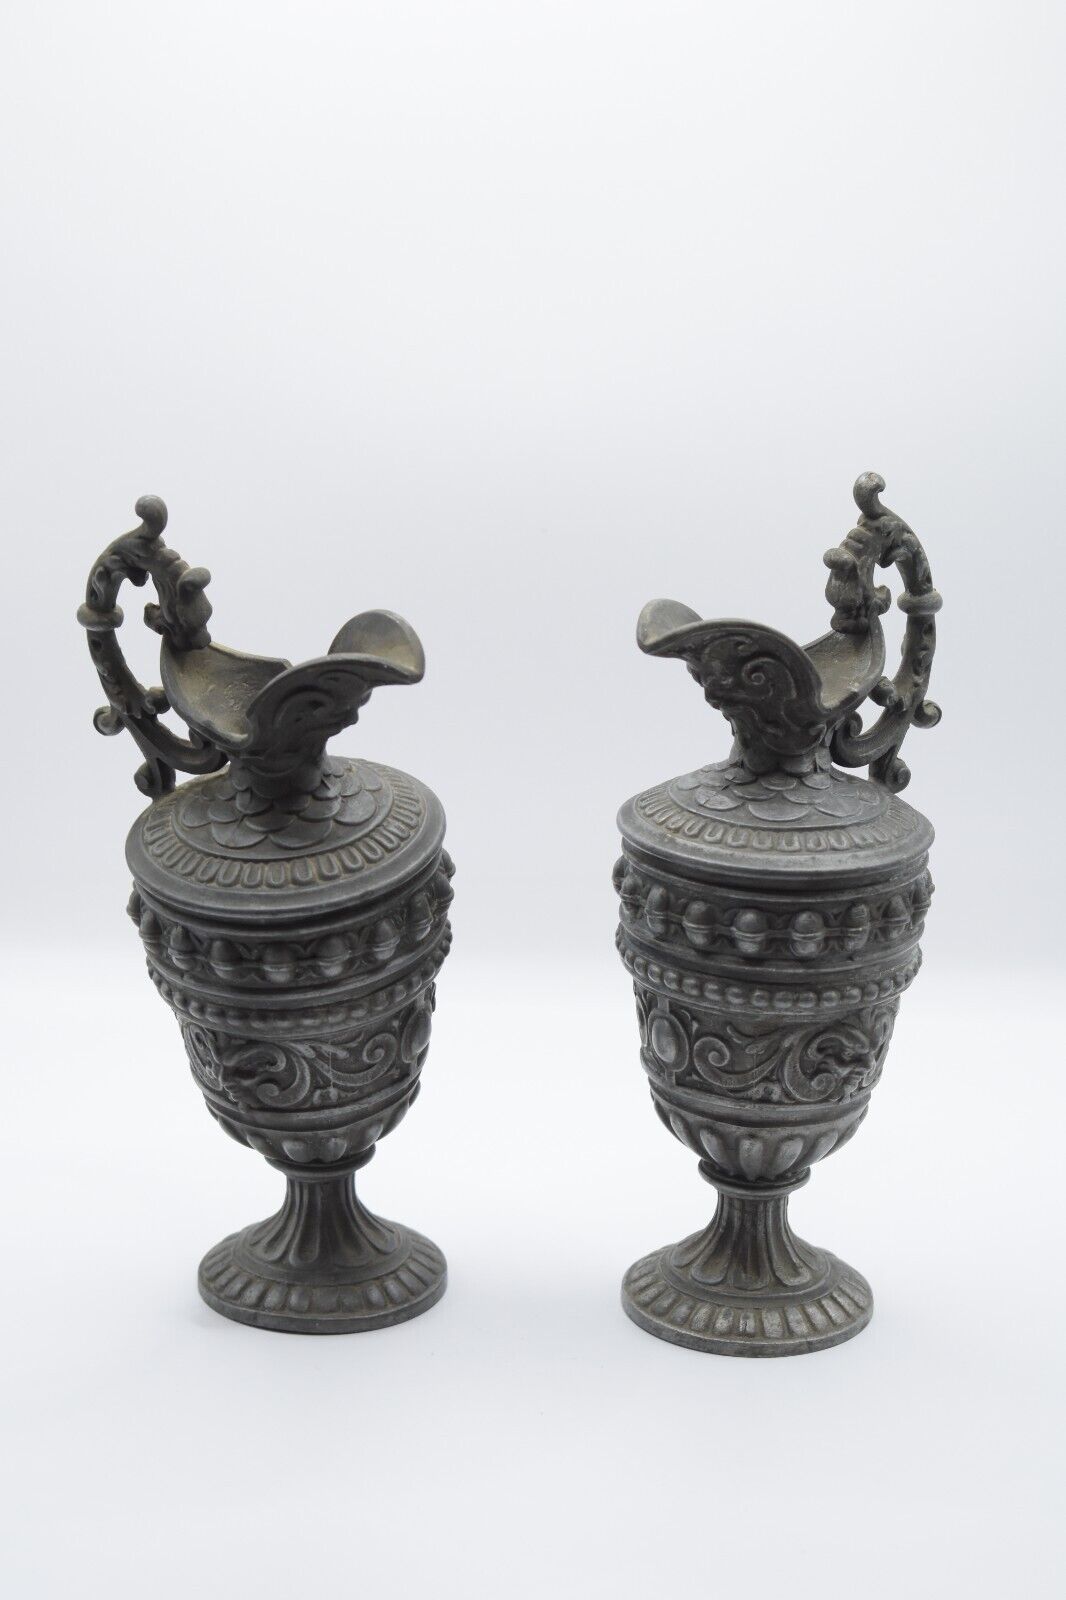 Pair of Antique French Cast Iron Pitcher StatueAmphora Urns